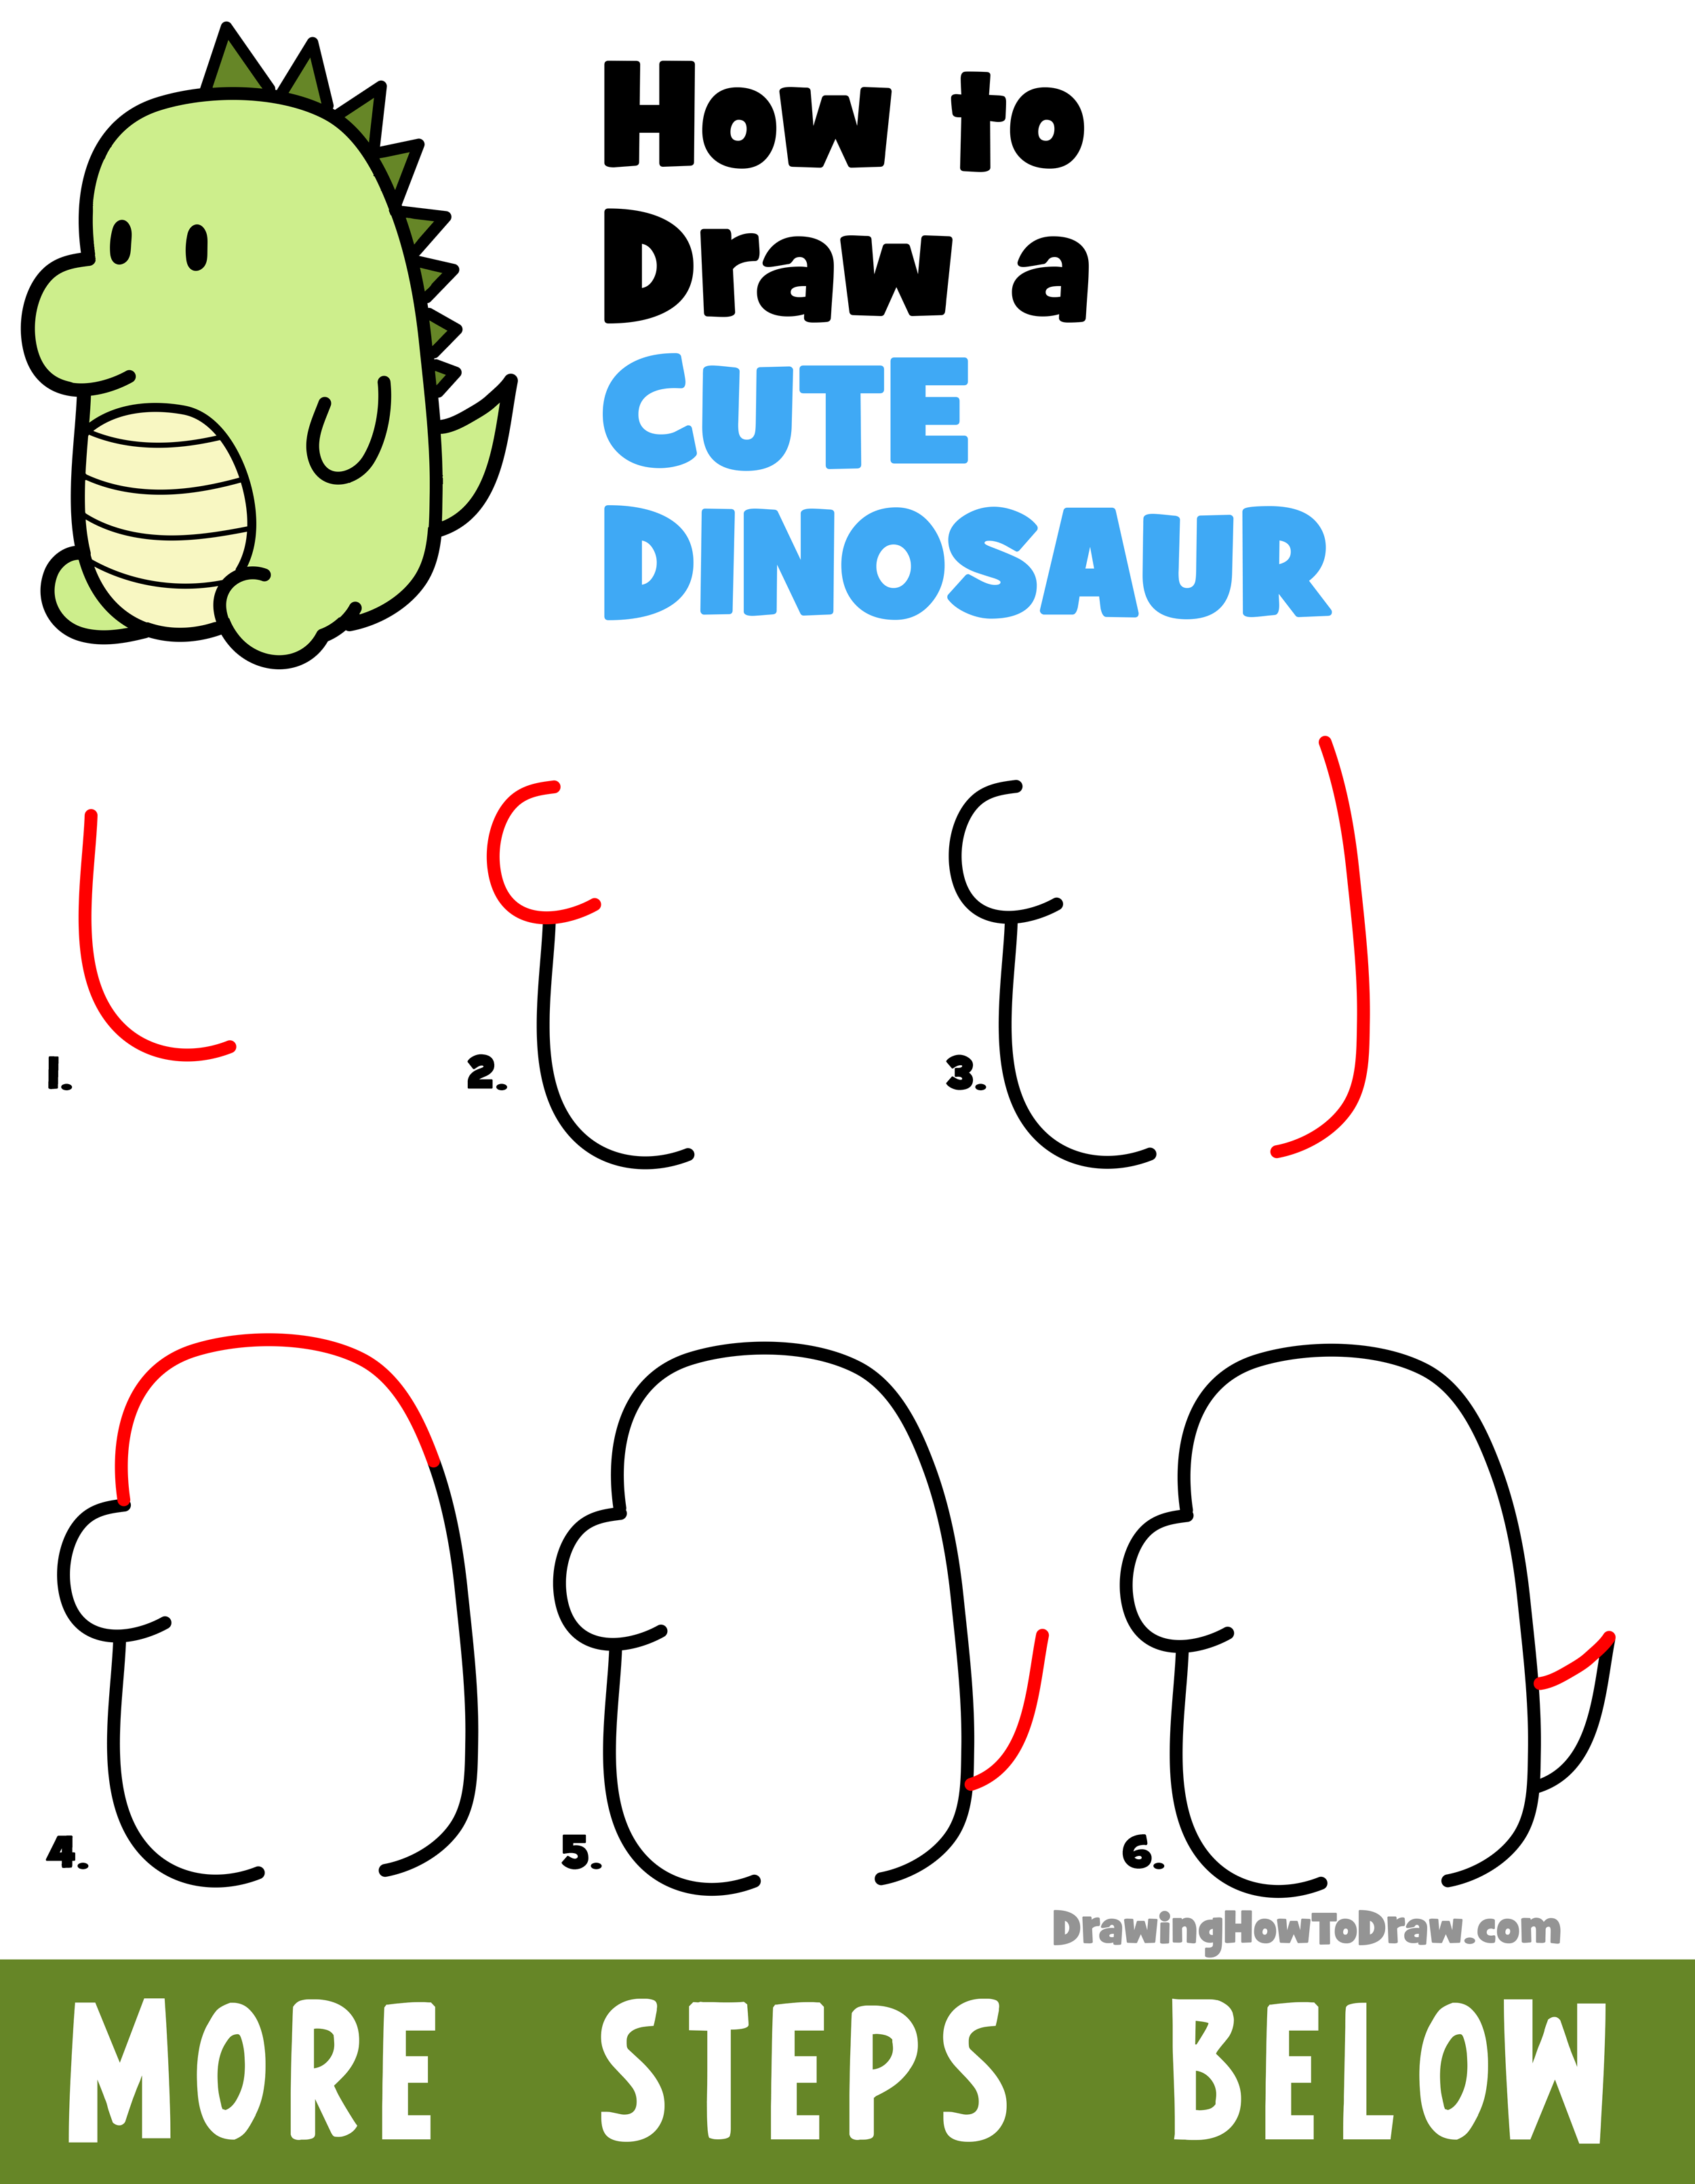 How To Draw Dinosaur  Sketch Transparent PNG  678x600  Free Download on  NicePNG